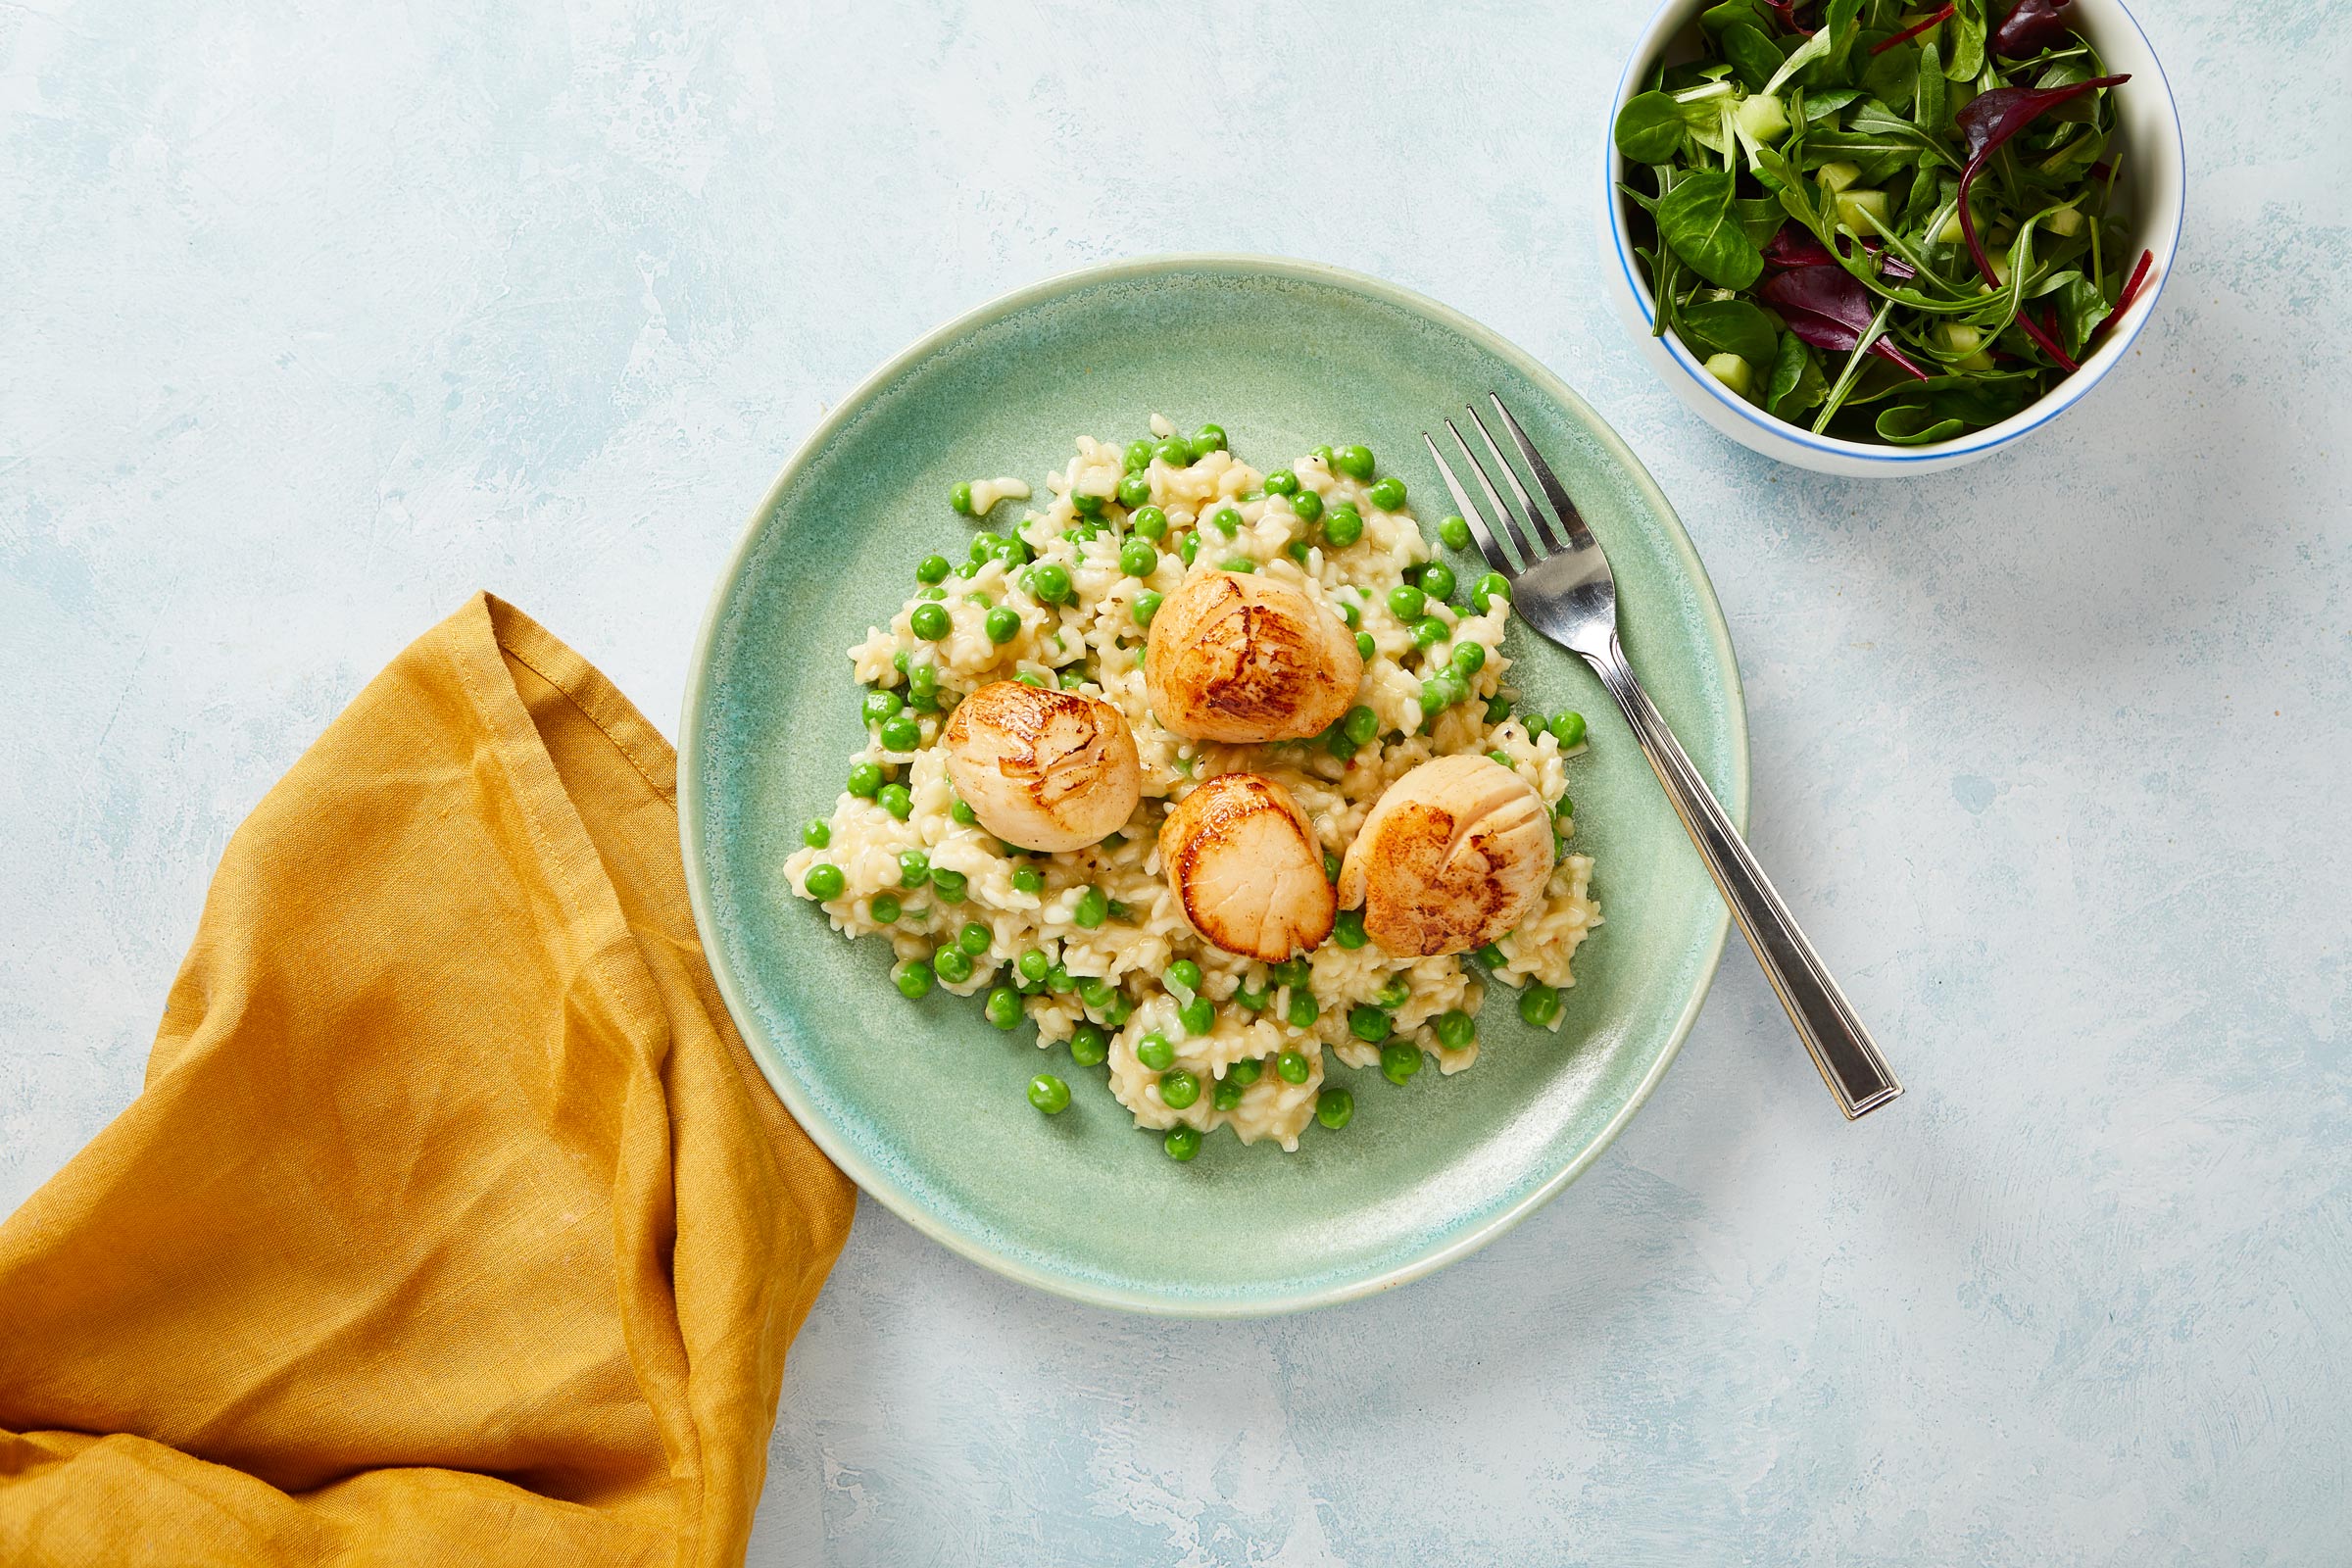 Scallop & Pea Risotto for LoveSeafood.org, Edinburgh food photographer Alastair Ferrier.